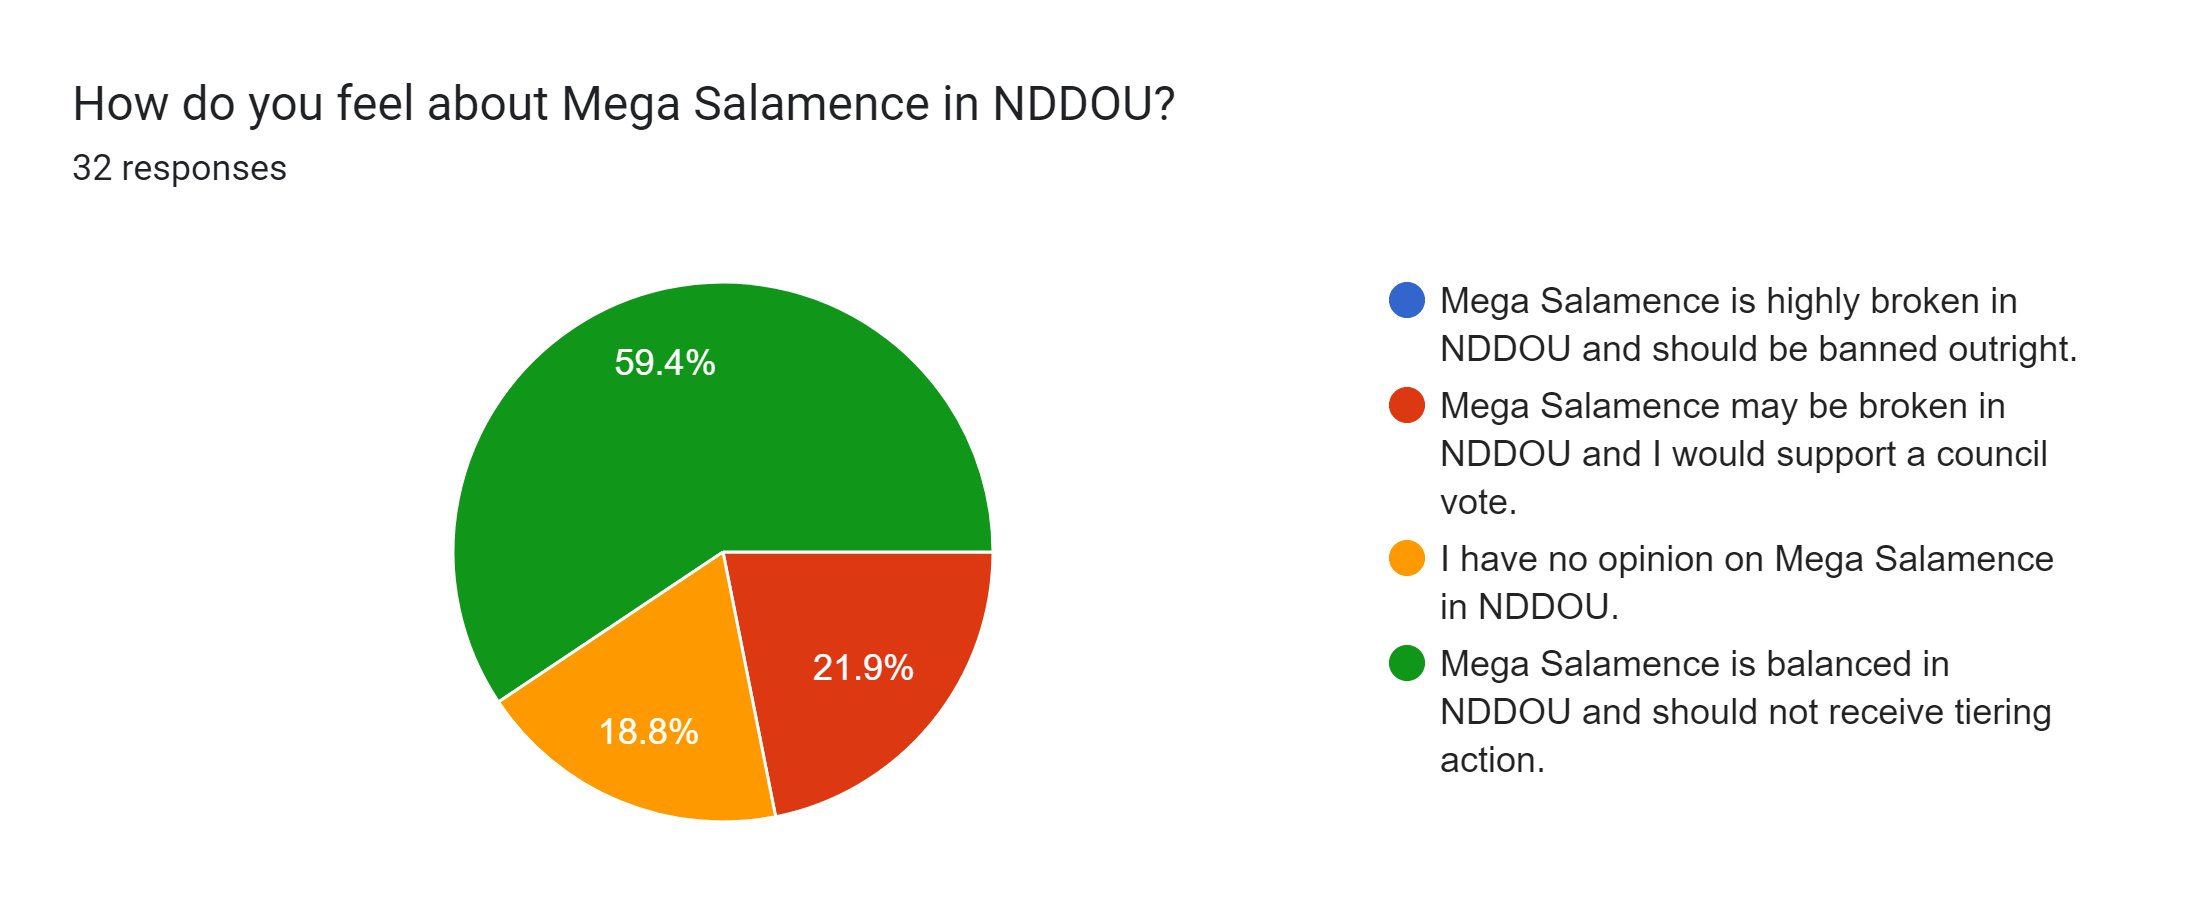 Forms response chart. Question title: How do you feel about Mega Salamence in NDDOU?. Number of responses: 32 responses.